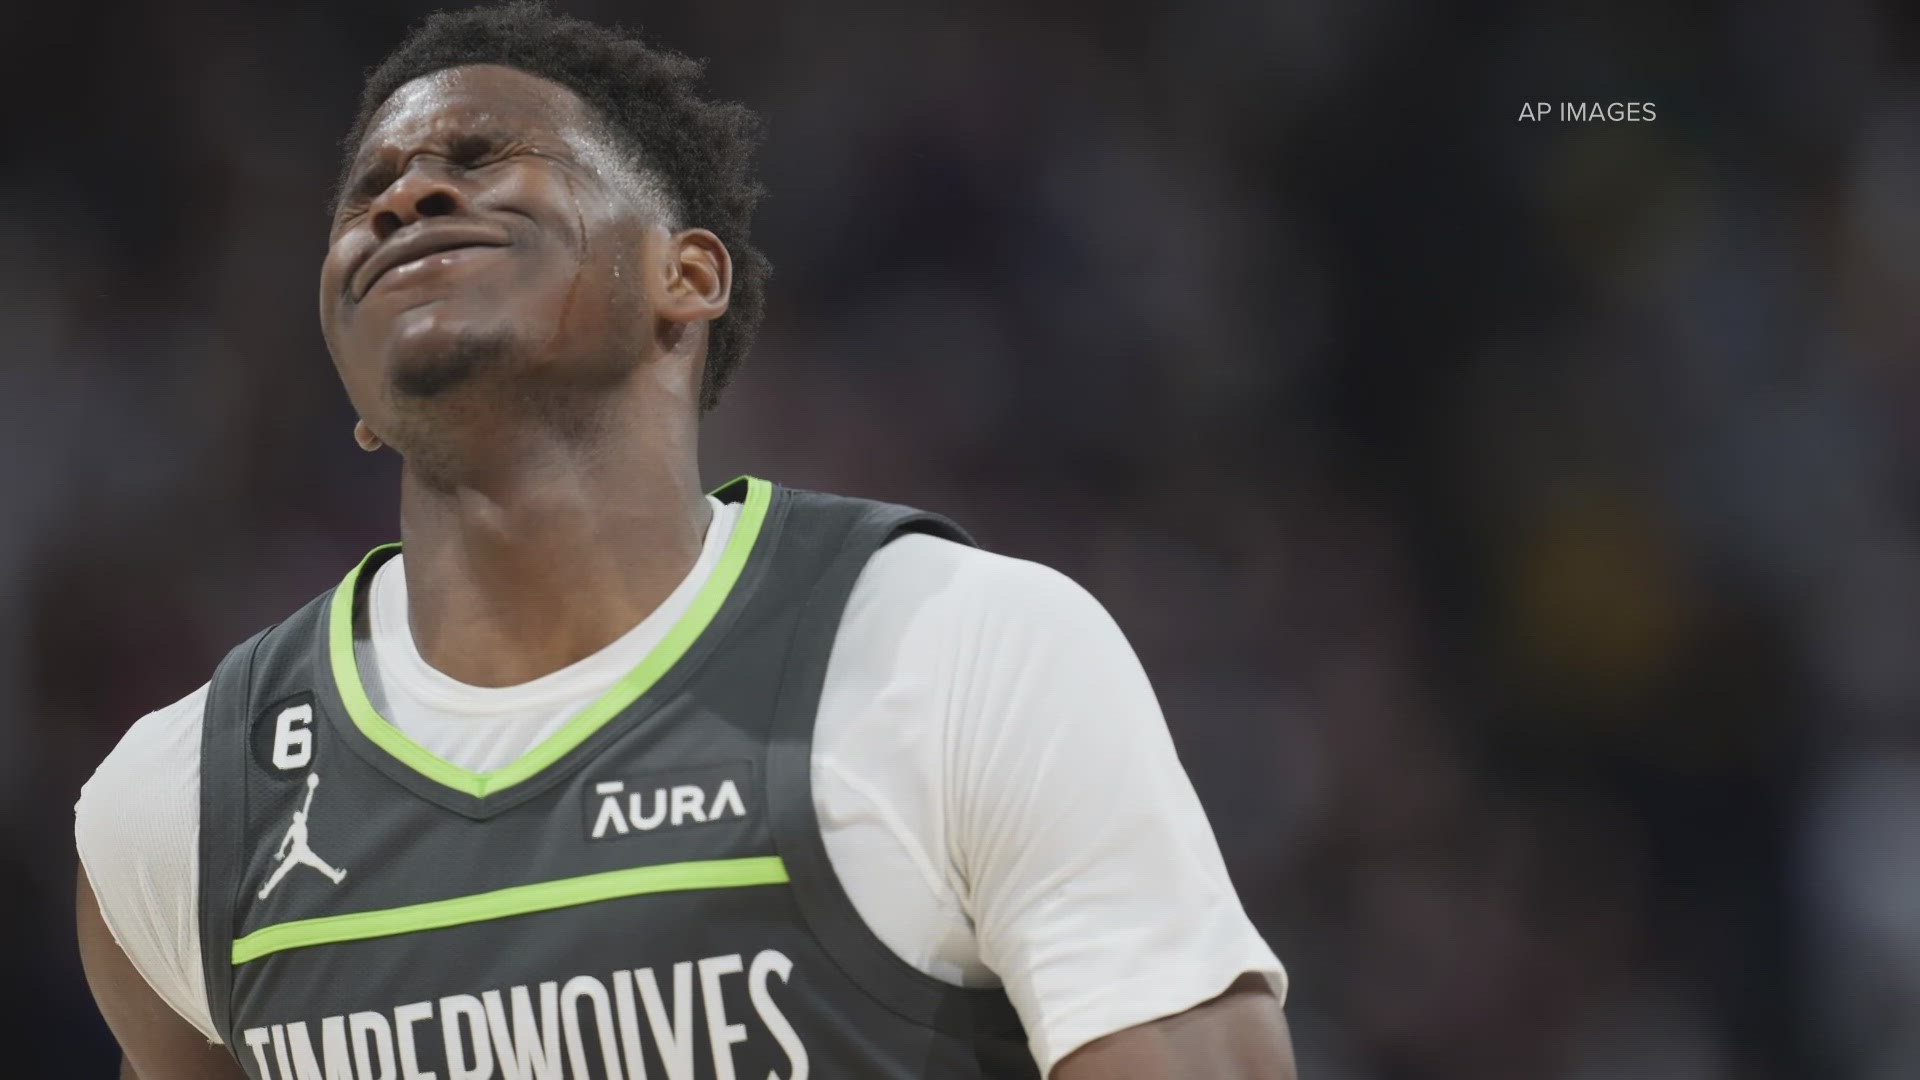 Anthony Edwards was cited for third-degree assault after reportedly swinging a folding chair, injuring two women, following team's season-ending loss to the Nuggets.